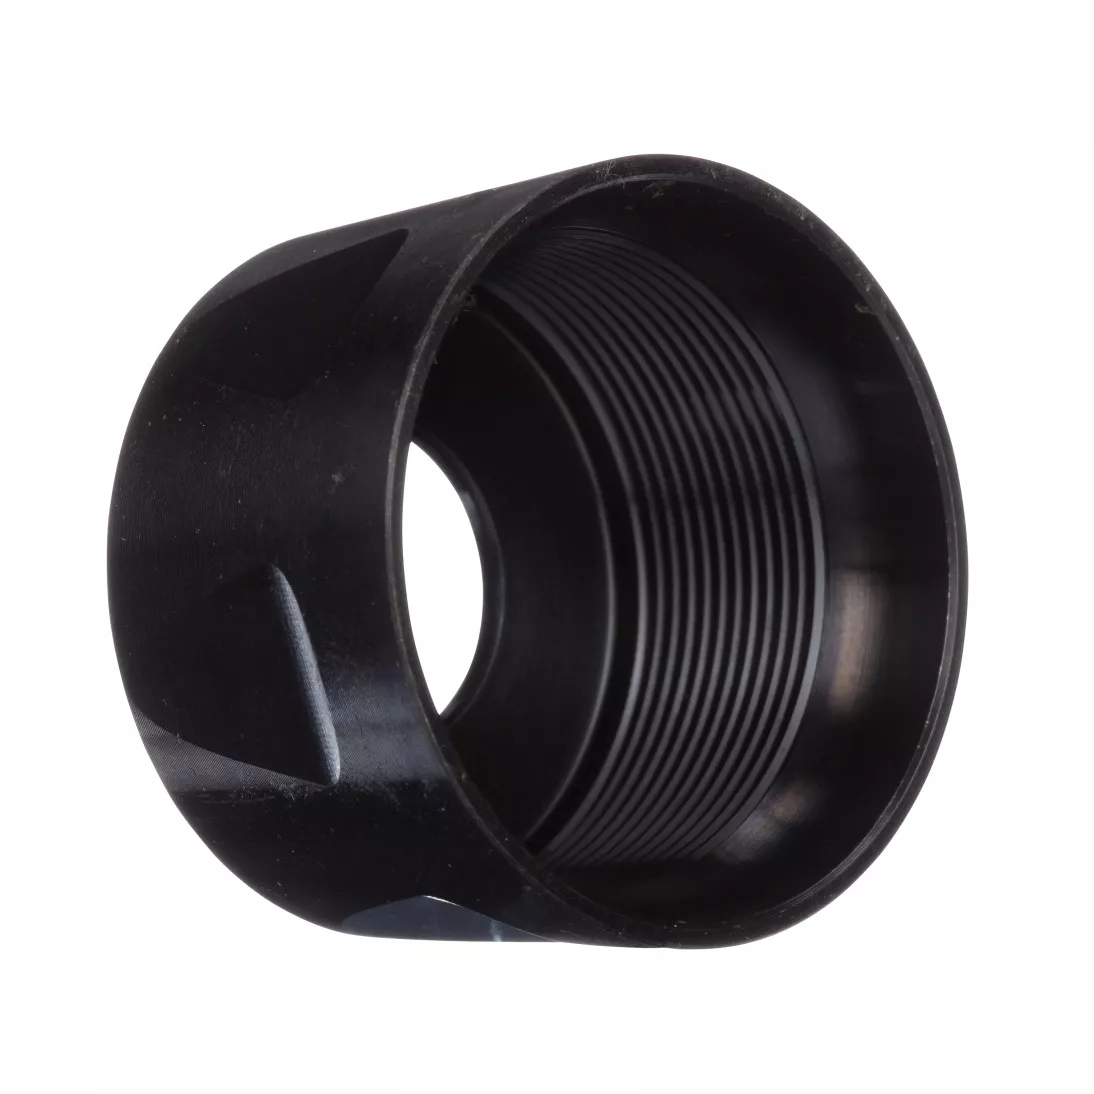 3M™ Clamp Nut for 28330 and 28345 87128